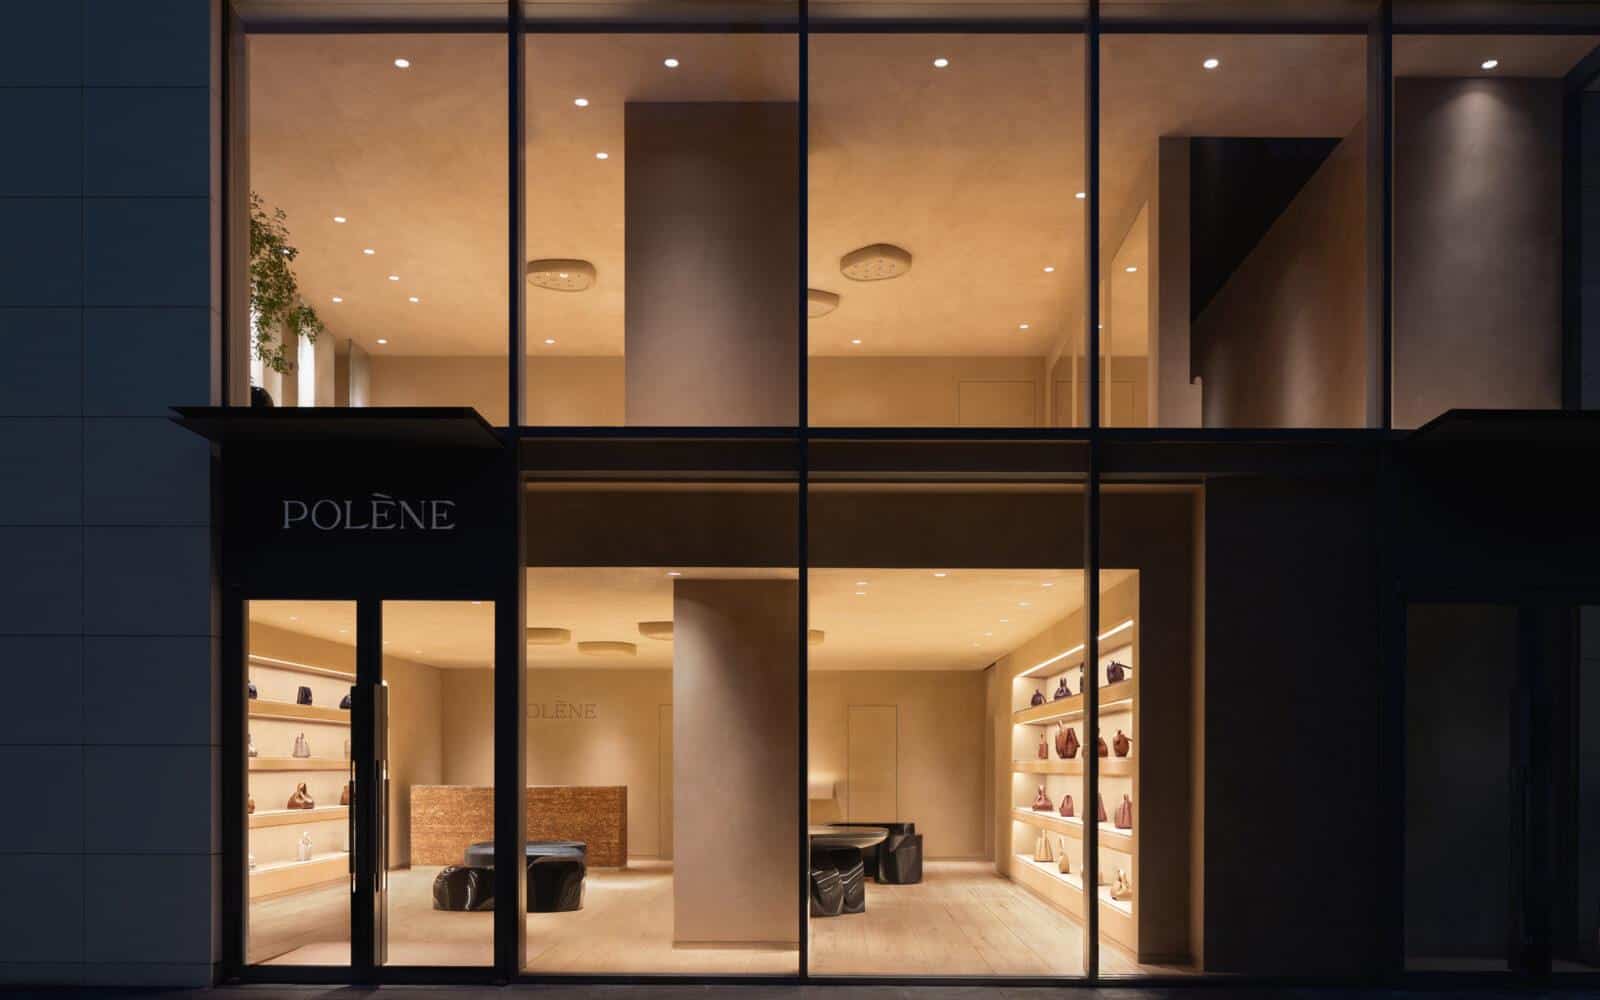 GARDE is taking part in the creation of Polène’s inaugural flagship store in Asia, rene of the most sought-after brands from Paris. The store is poised to open its doors on September 1st.